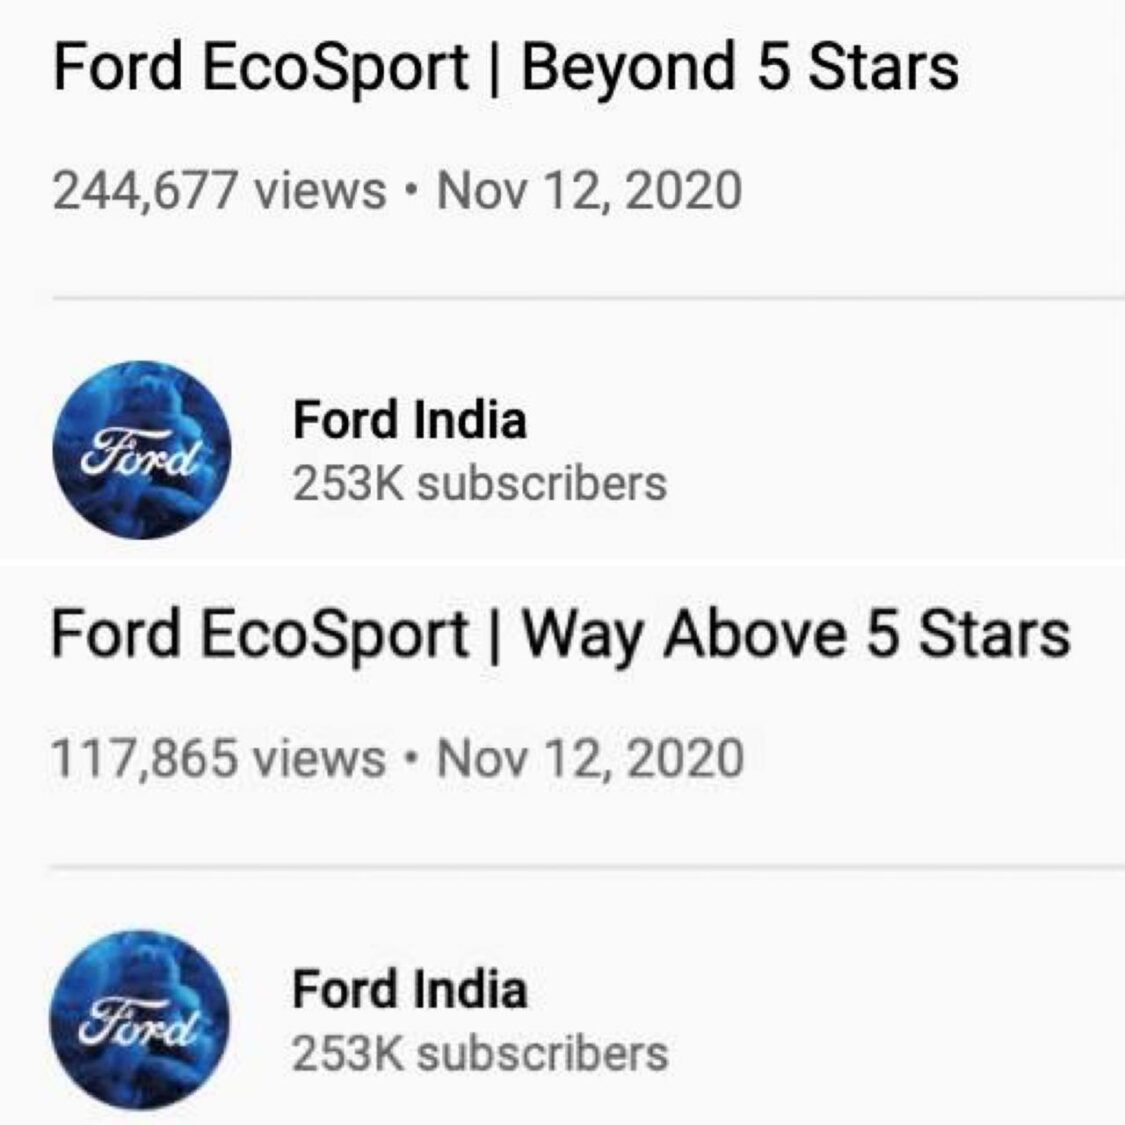 Ford India Changes Title Of Their Misleading Ad